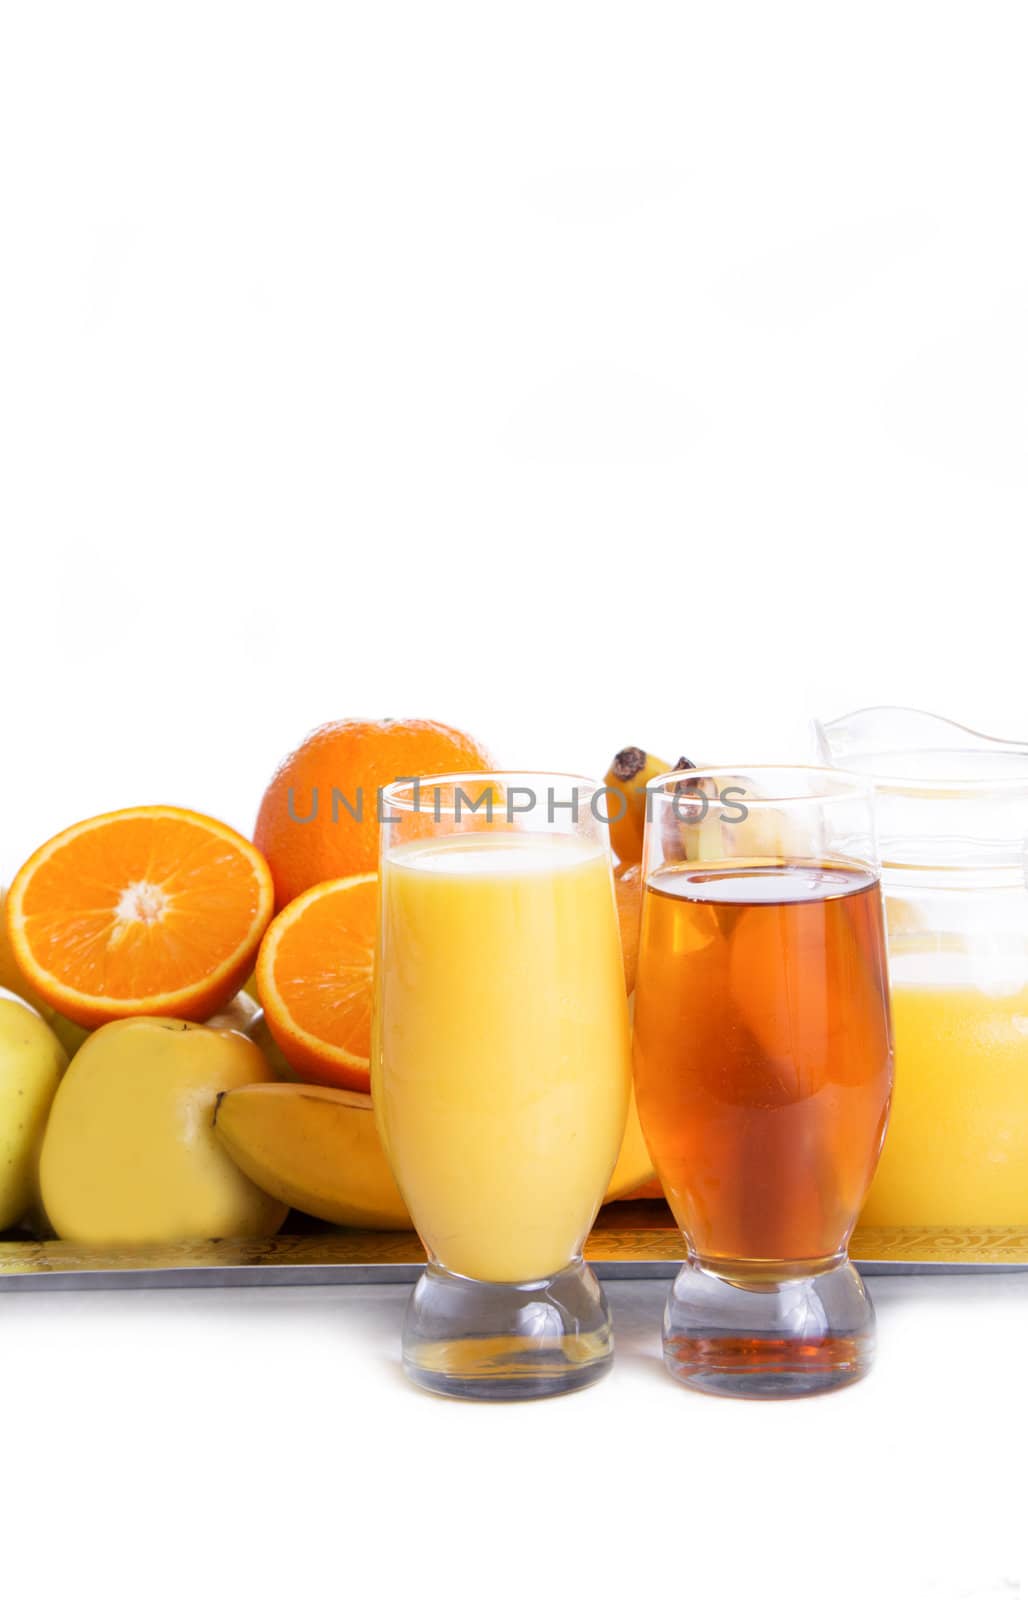 Apple and orange fruits with juice on tray over white